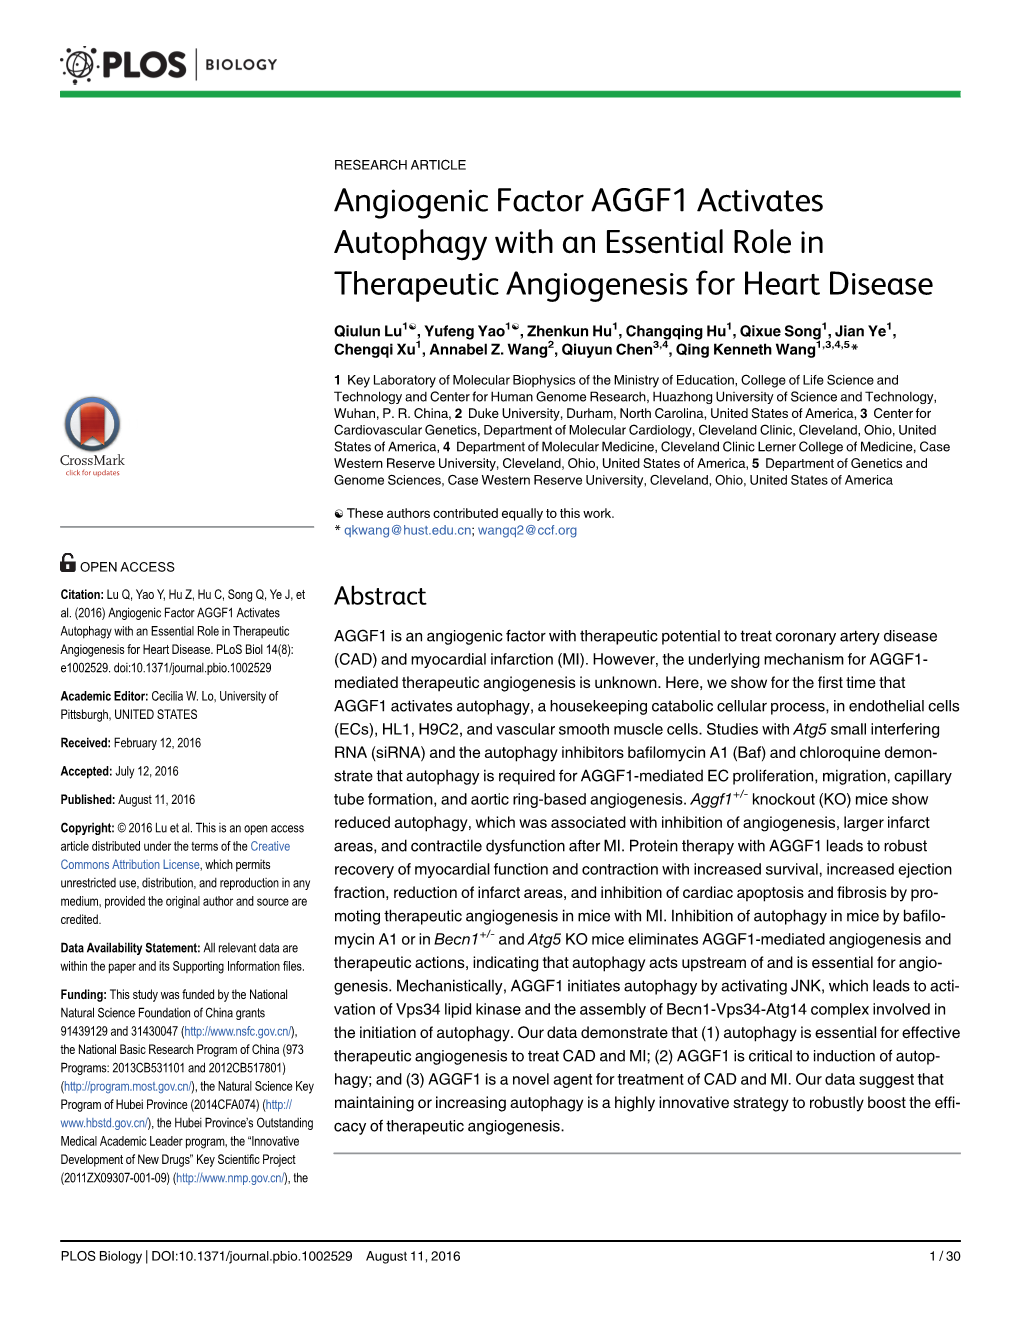 Angiogenic Factor AGGF1 Activates Autophagy with an Essential Role in Therapeutic Angiogenesis for Heart Disease